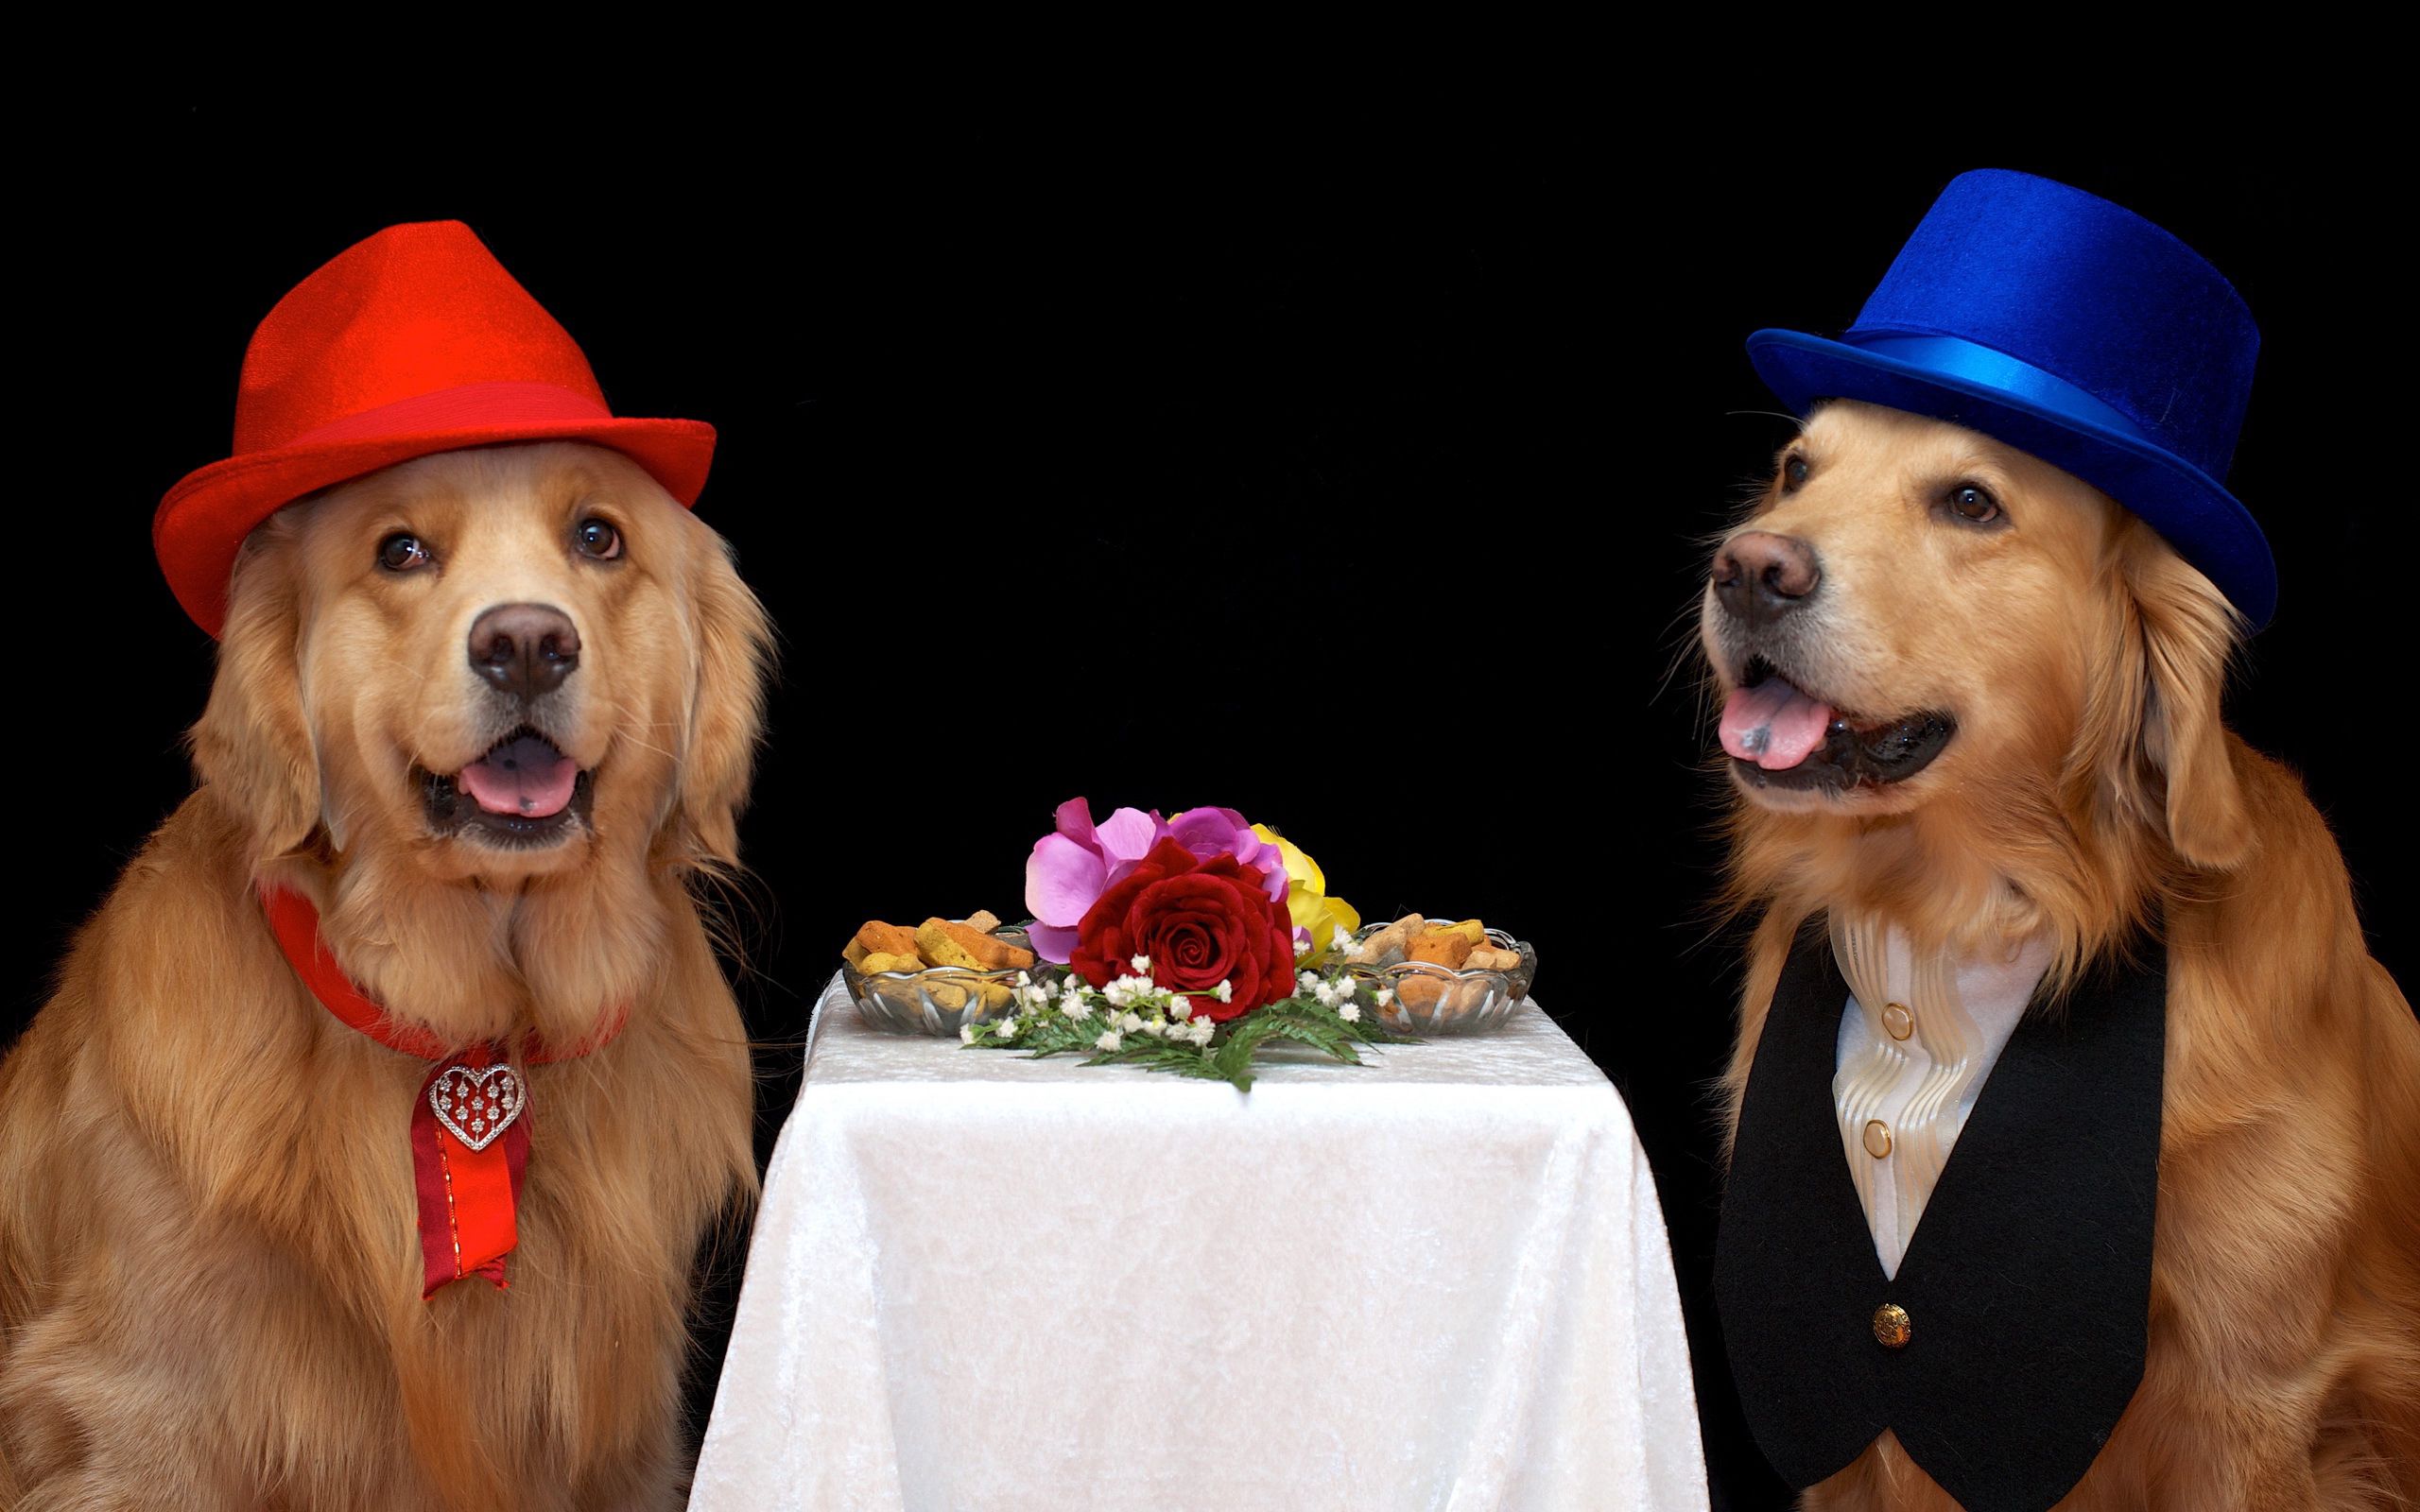 animals, dogs, flowers, food, hats